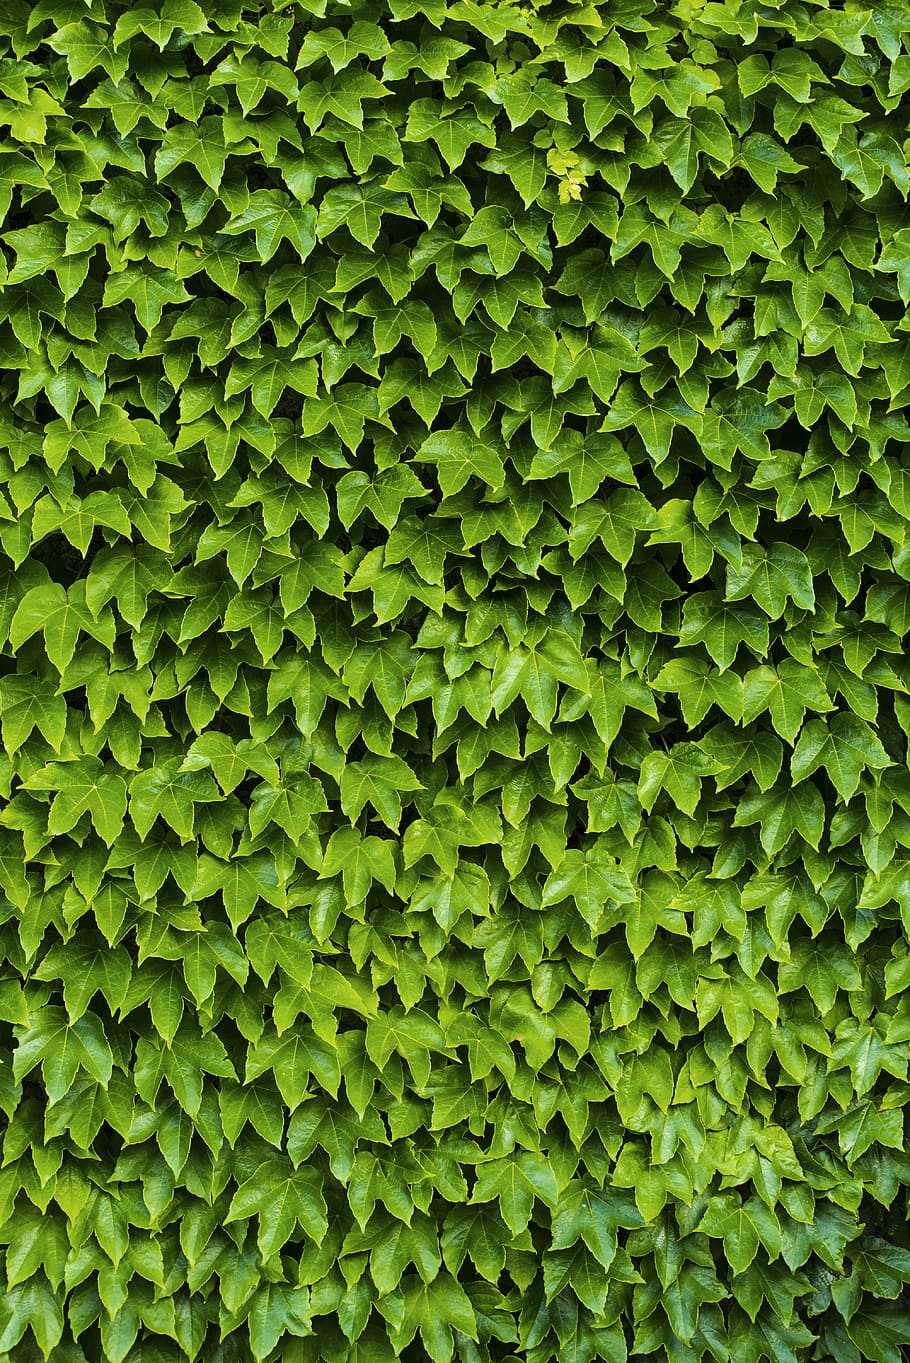 green leaves, leaf, texture, surface, repetition, asoggetti, foliage